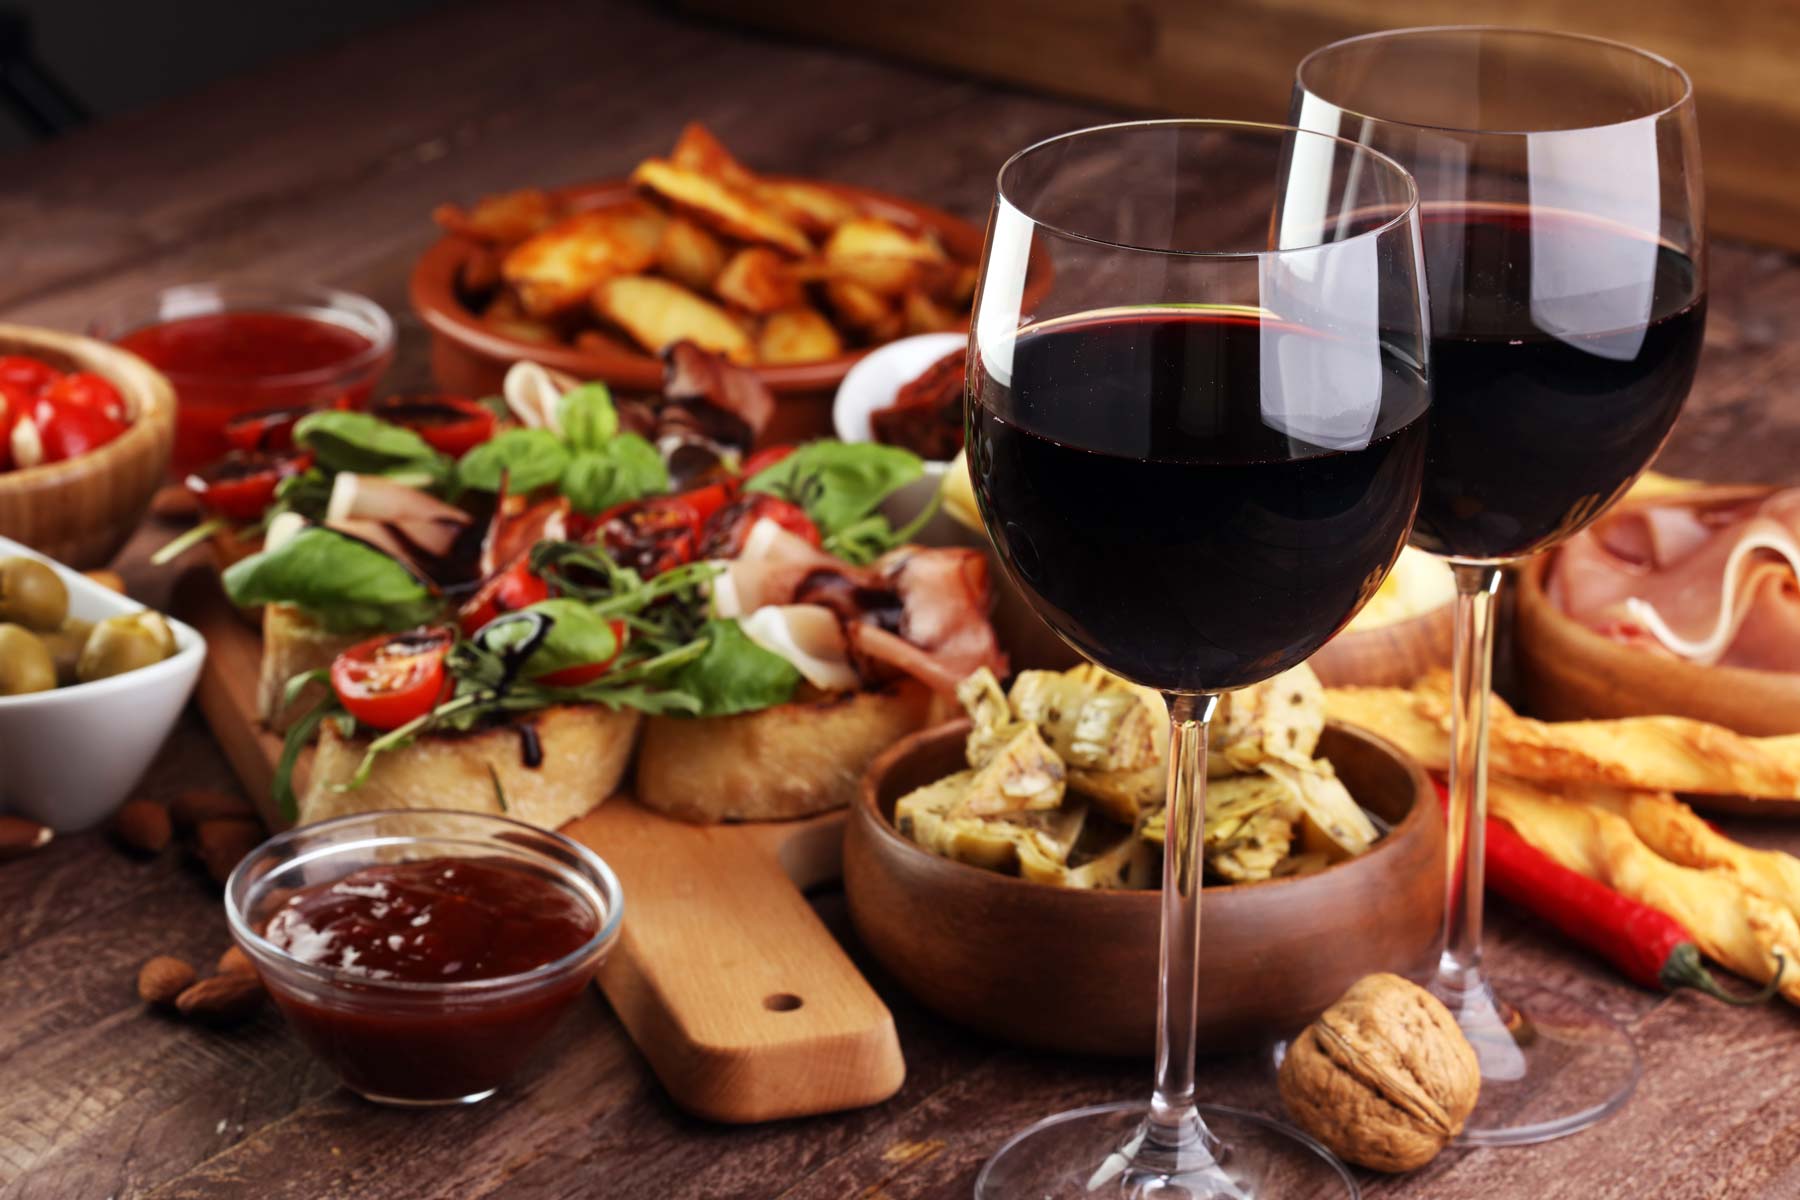 Two glasses of wine and food spread out on a table